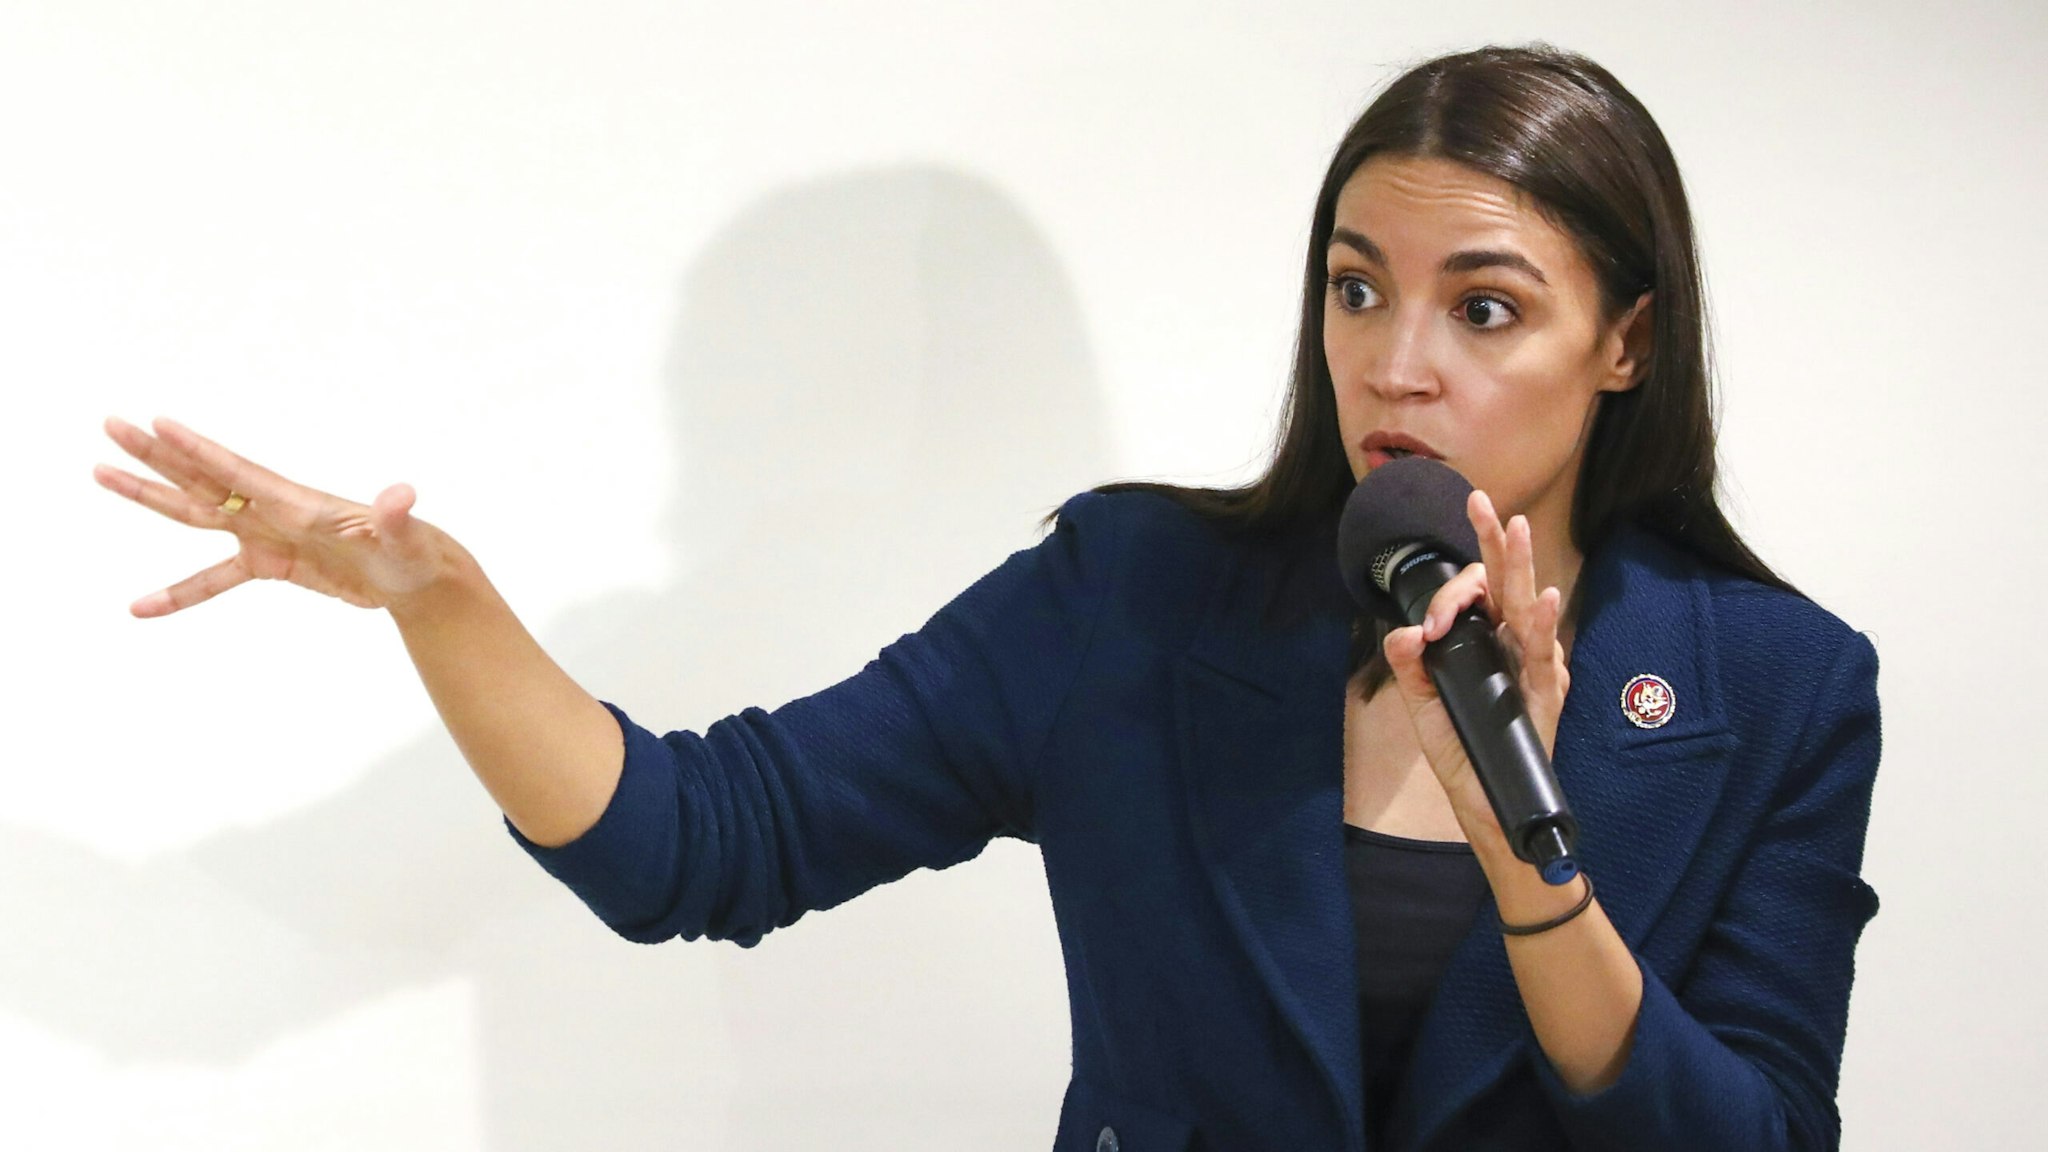 NEW YORK, NY - OCTOBER 03: U.S. Rep. Alexandria Ocasio-Cortez (D-NY) speaks during a town hall meeting at the LeFrak City Queens Library on October 3, 2019 in the Queens borough of New York City. The event focused on her A Just Society legislation, which targets poverty, affordable housing, and access to federal benefits.